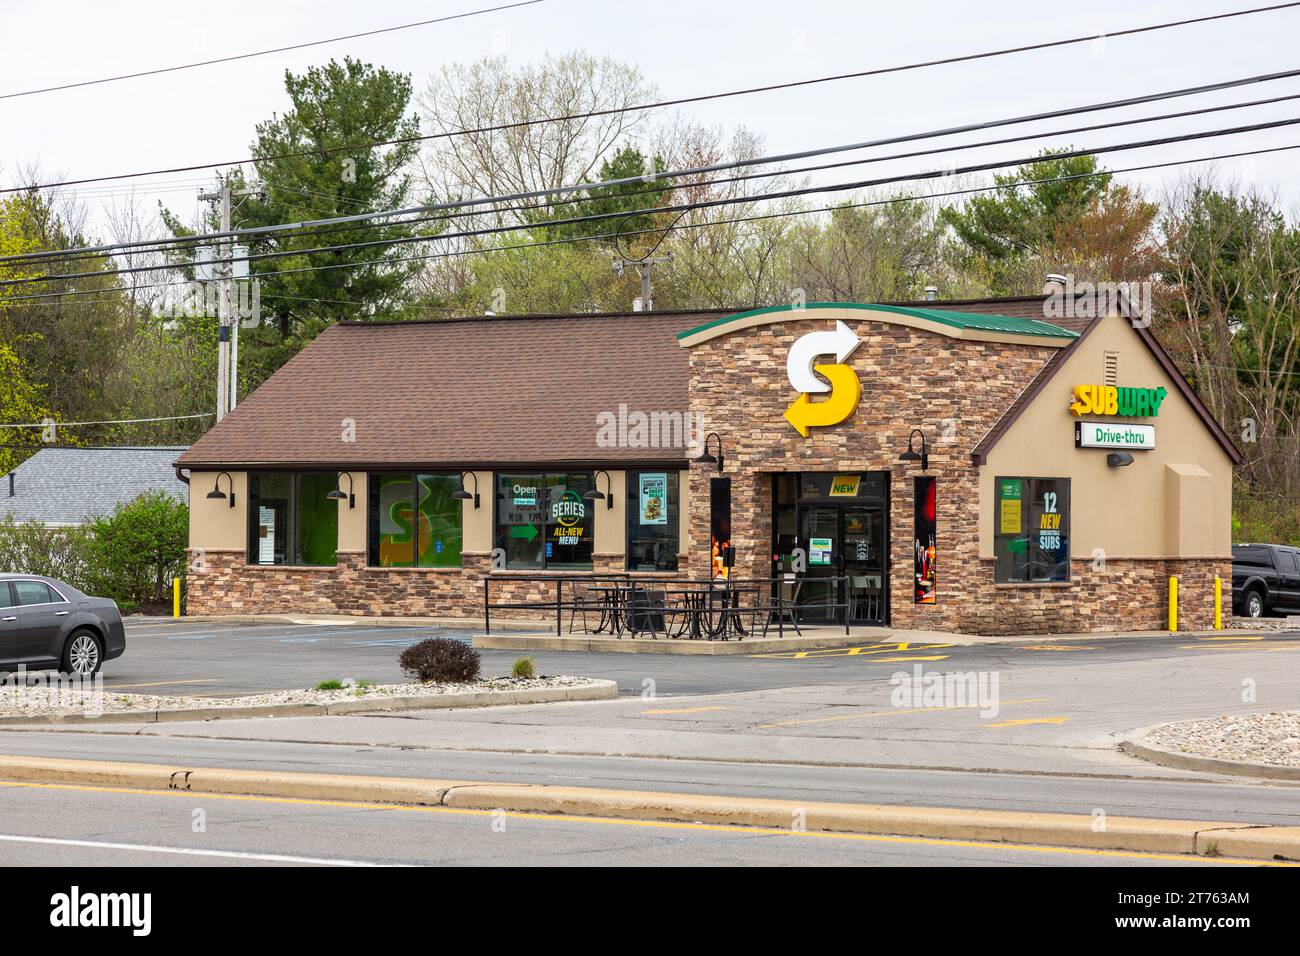 The Subway sandwich shop on Stellhorn Road in Fort Wayne, Indiana, USA. Stock Photo